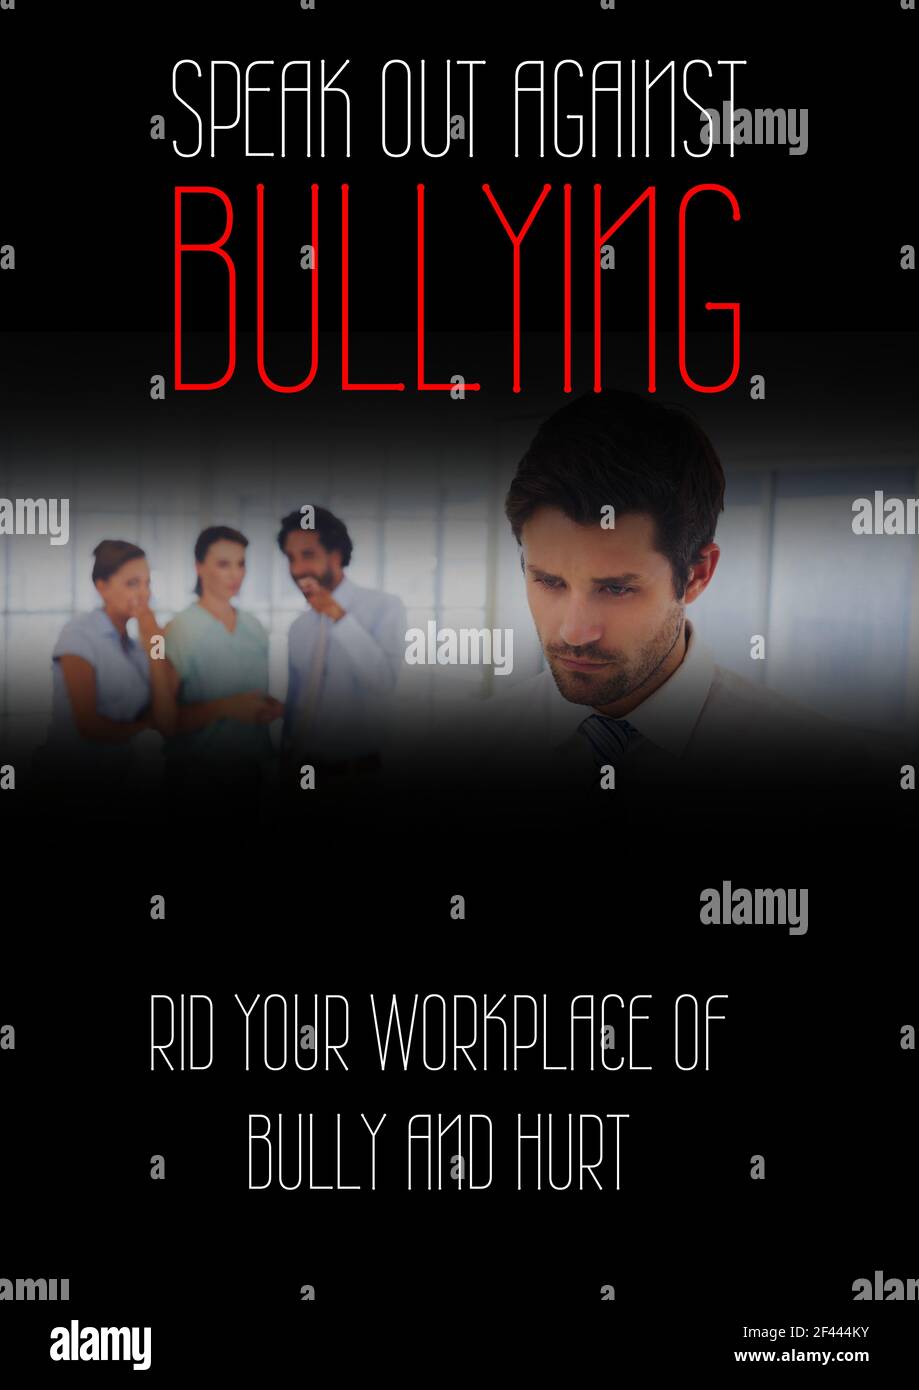 Speak out against bullying text against office colleagues bullying a man at office Stock Photo